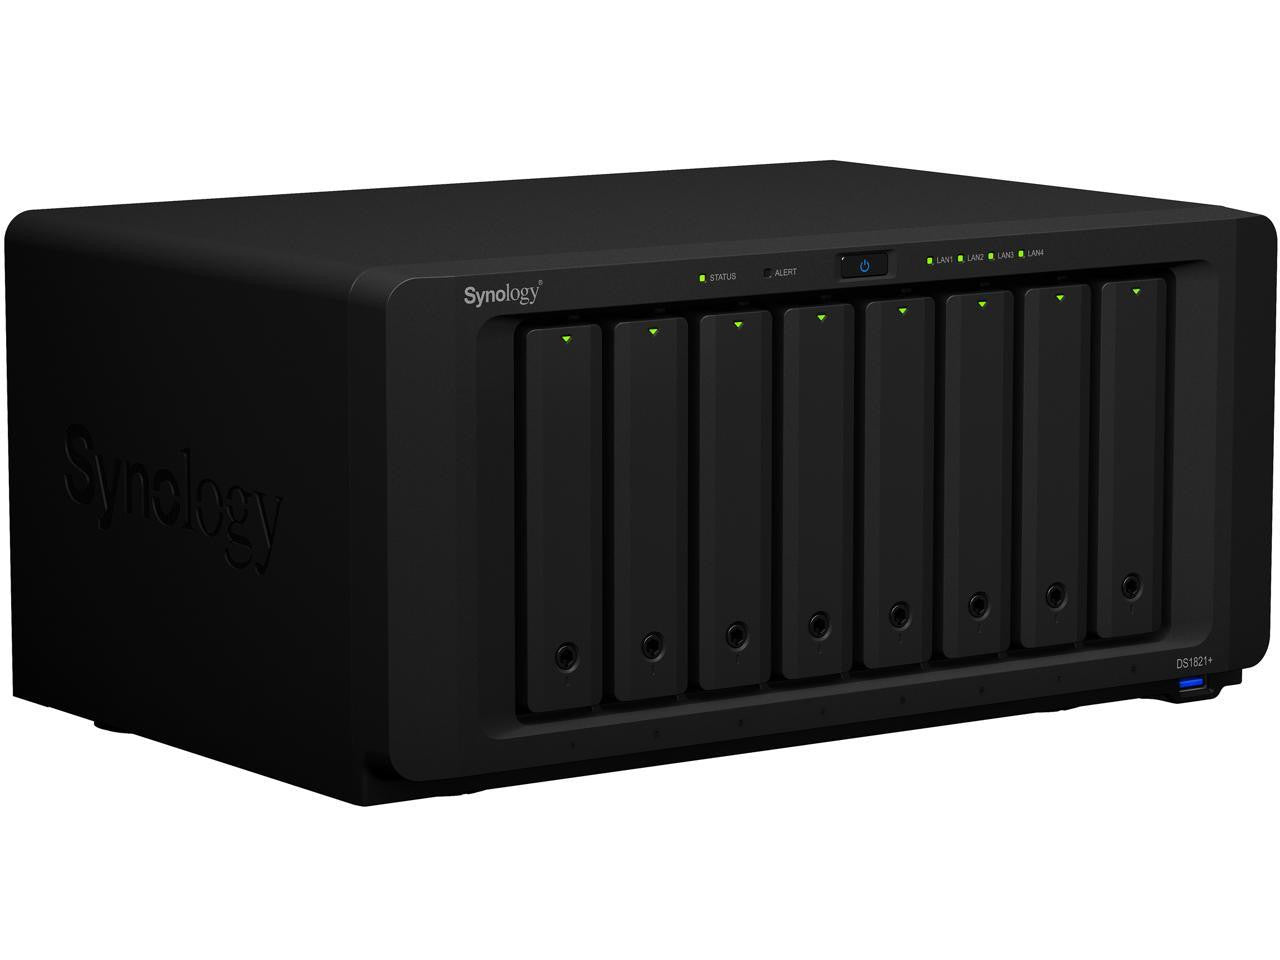 Synology DS1821+ 8-BAY DiskStation with 16GB RAM, 800GB (2x400GB) Cache and 96TB (8 x 12TB) of Synology Enterprise HAT5300 Drives Fully Assembled and Tested